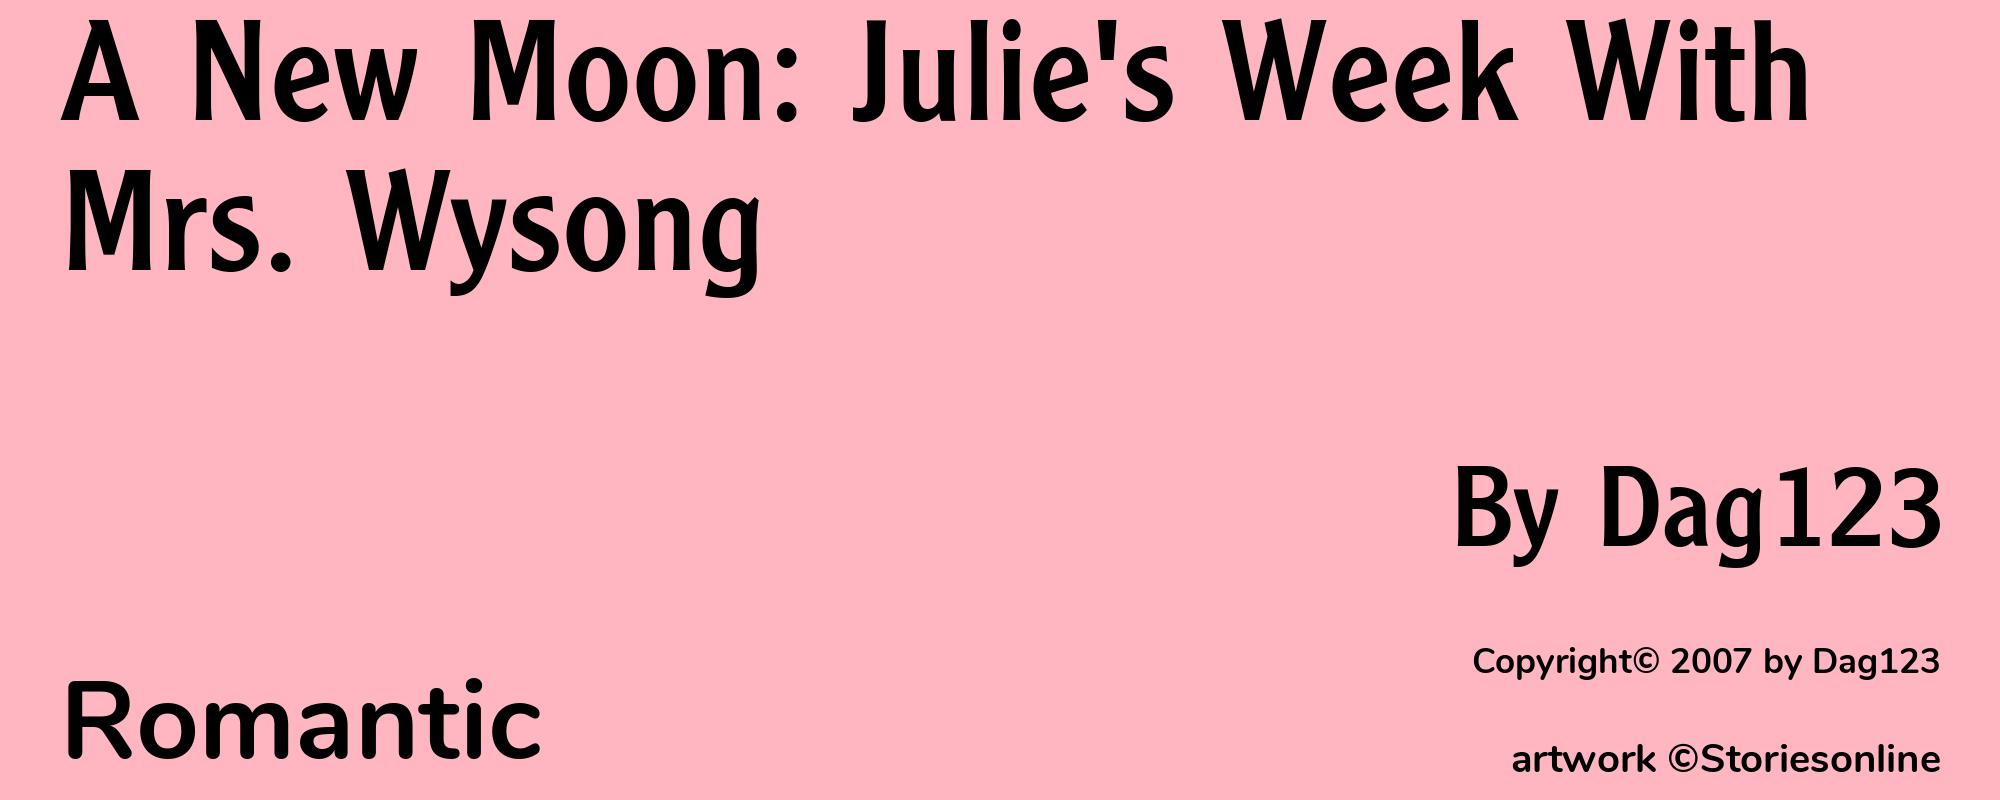 A New Moon: Julie's Week With Mrs. Wysong - Cover